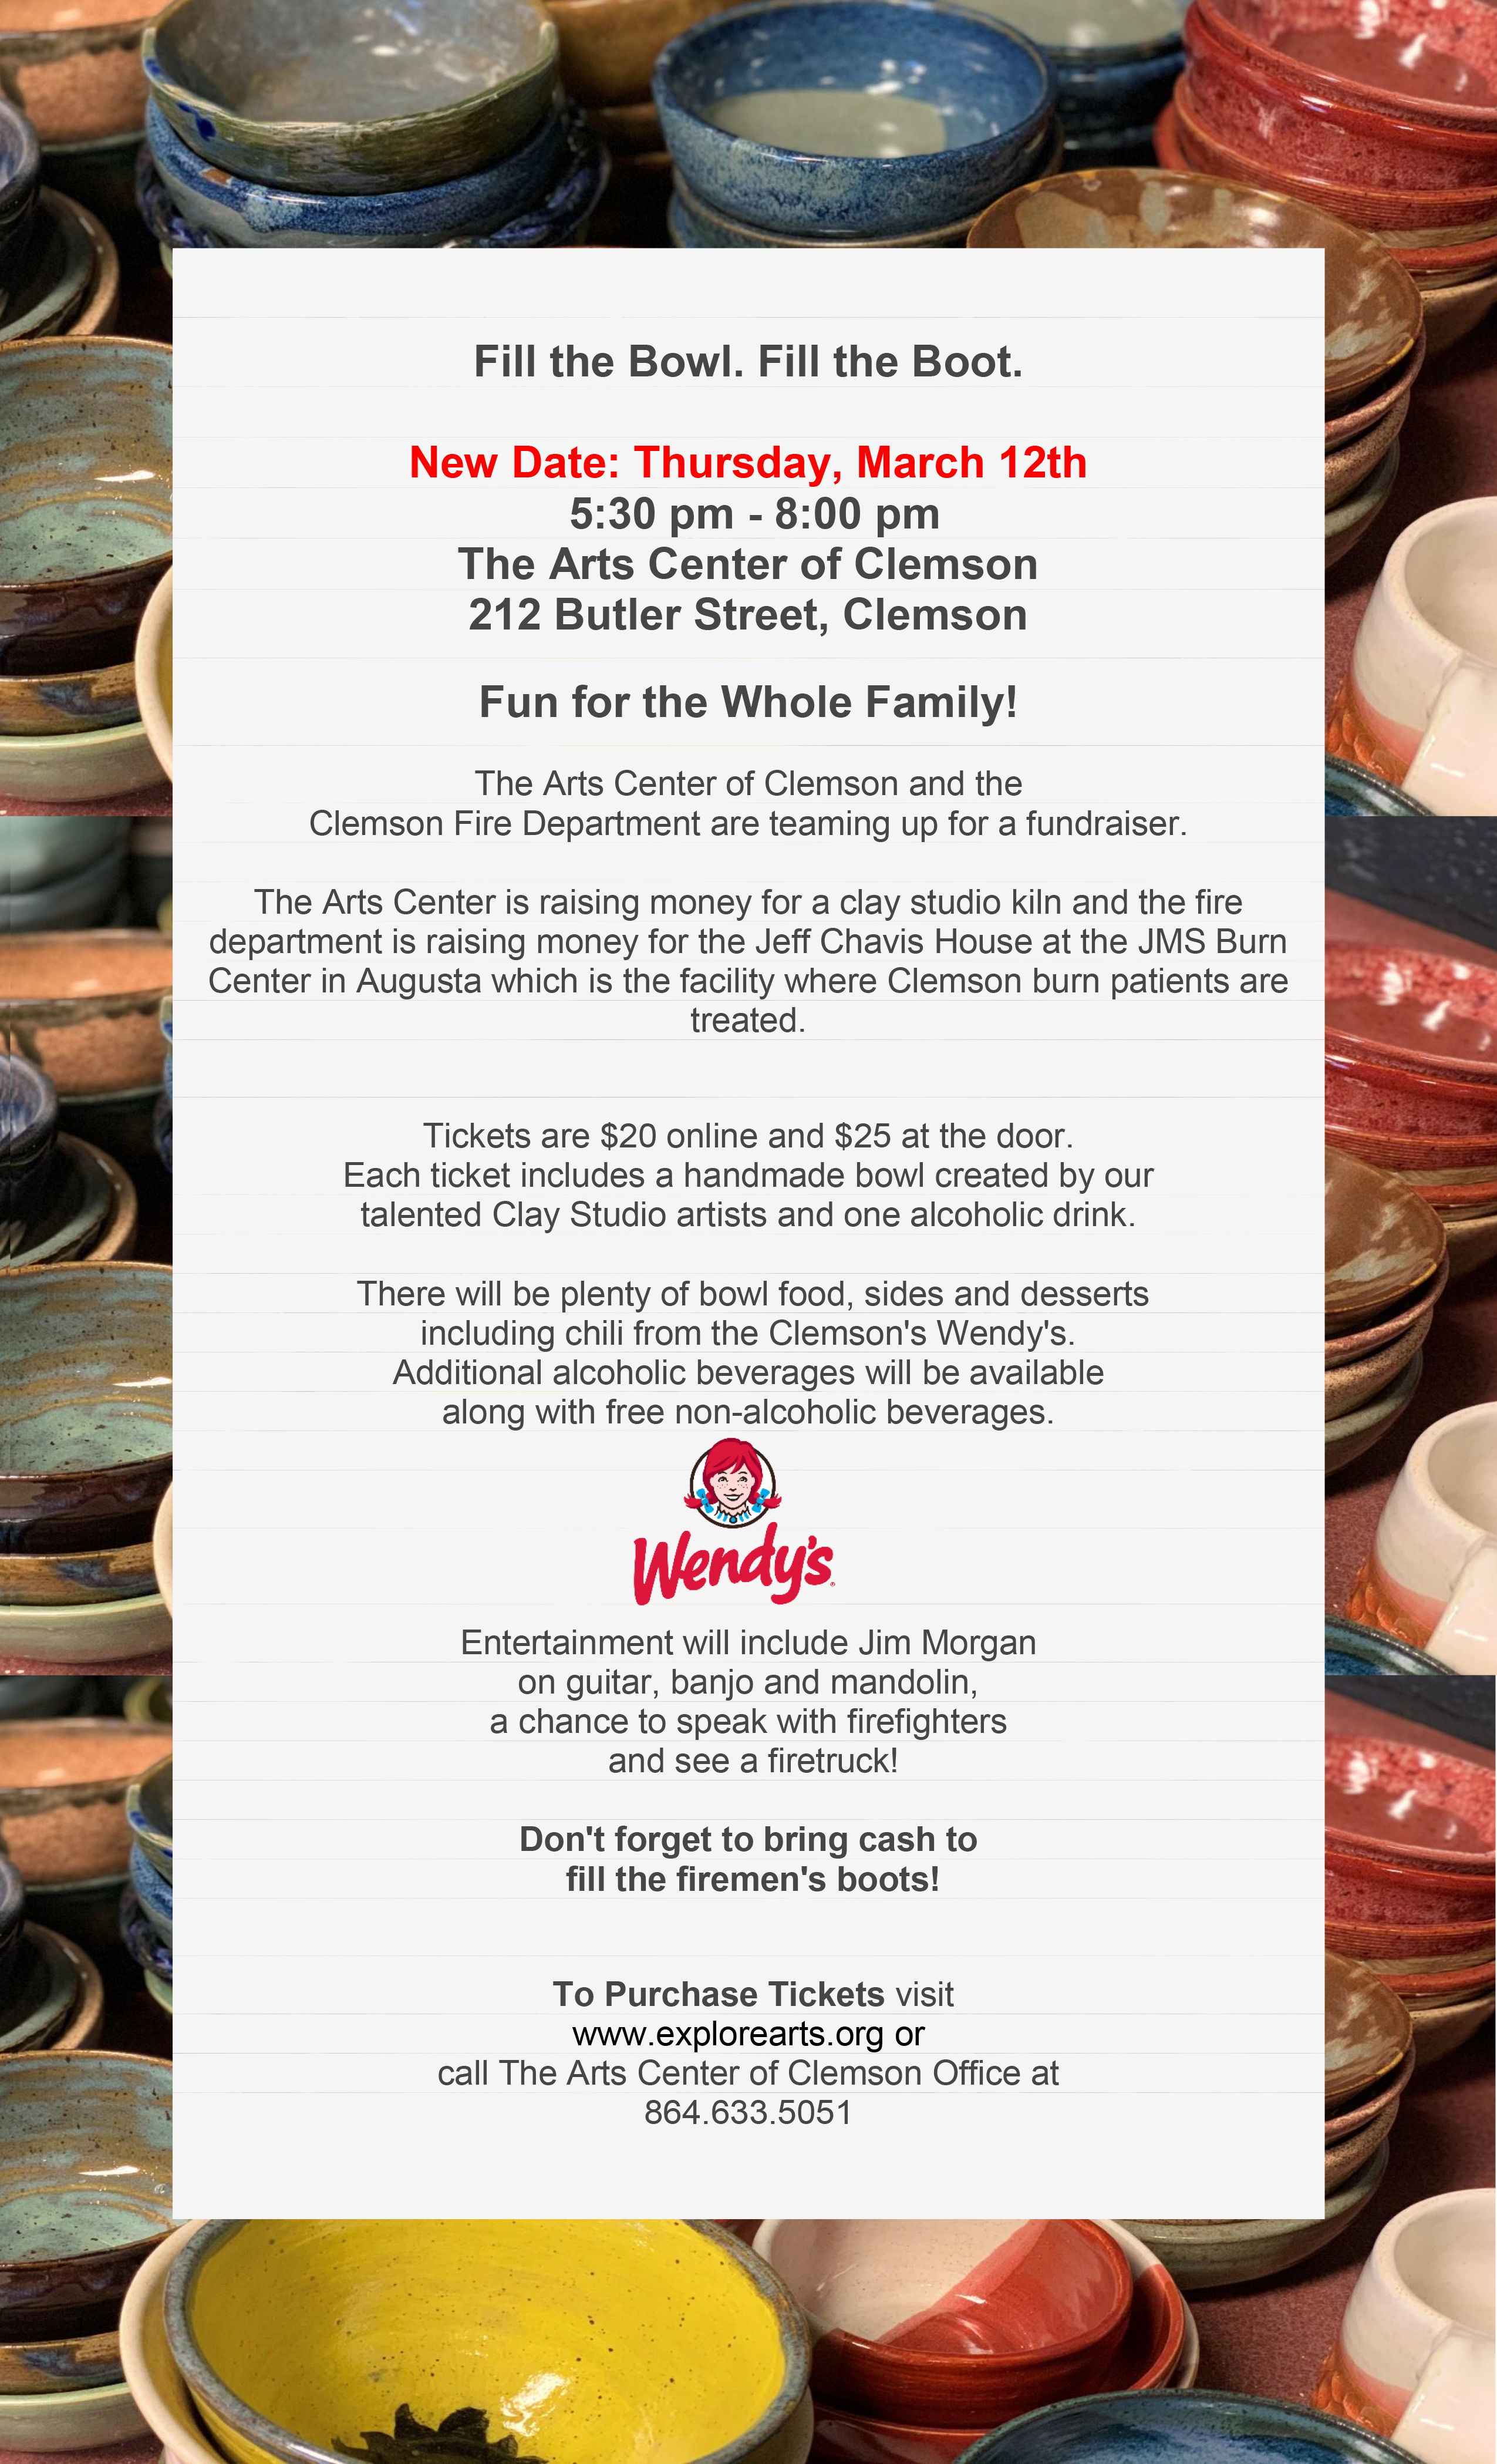 Fill the Bowl, Fill the Boot Fundraiser March 12th at the Arts Center of Clemson